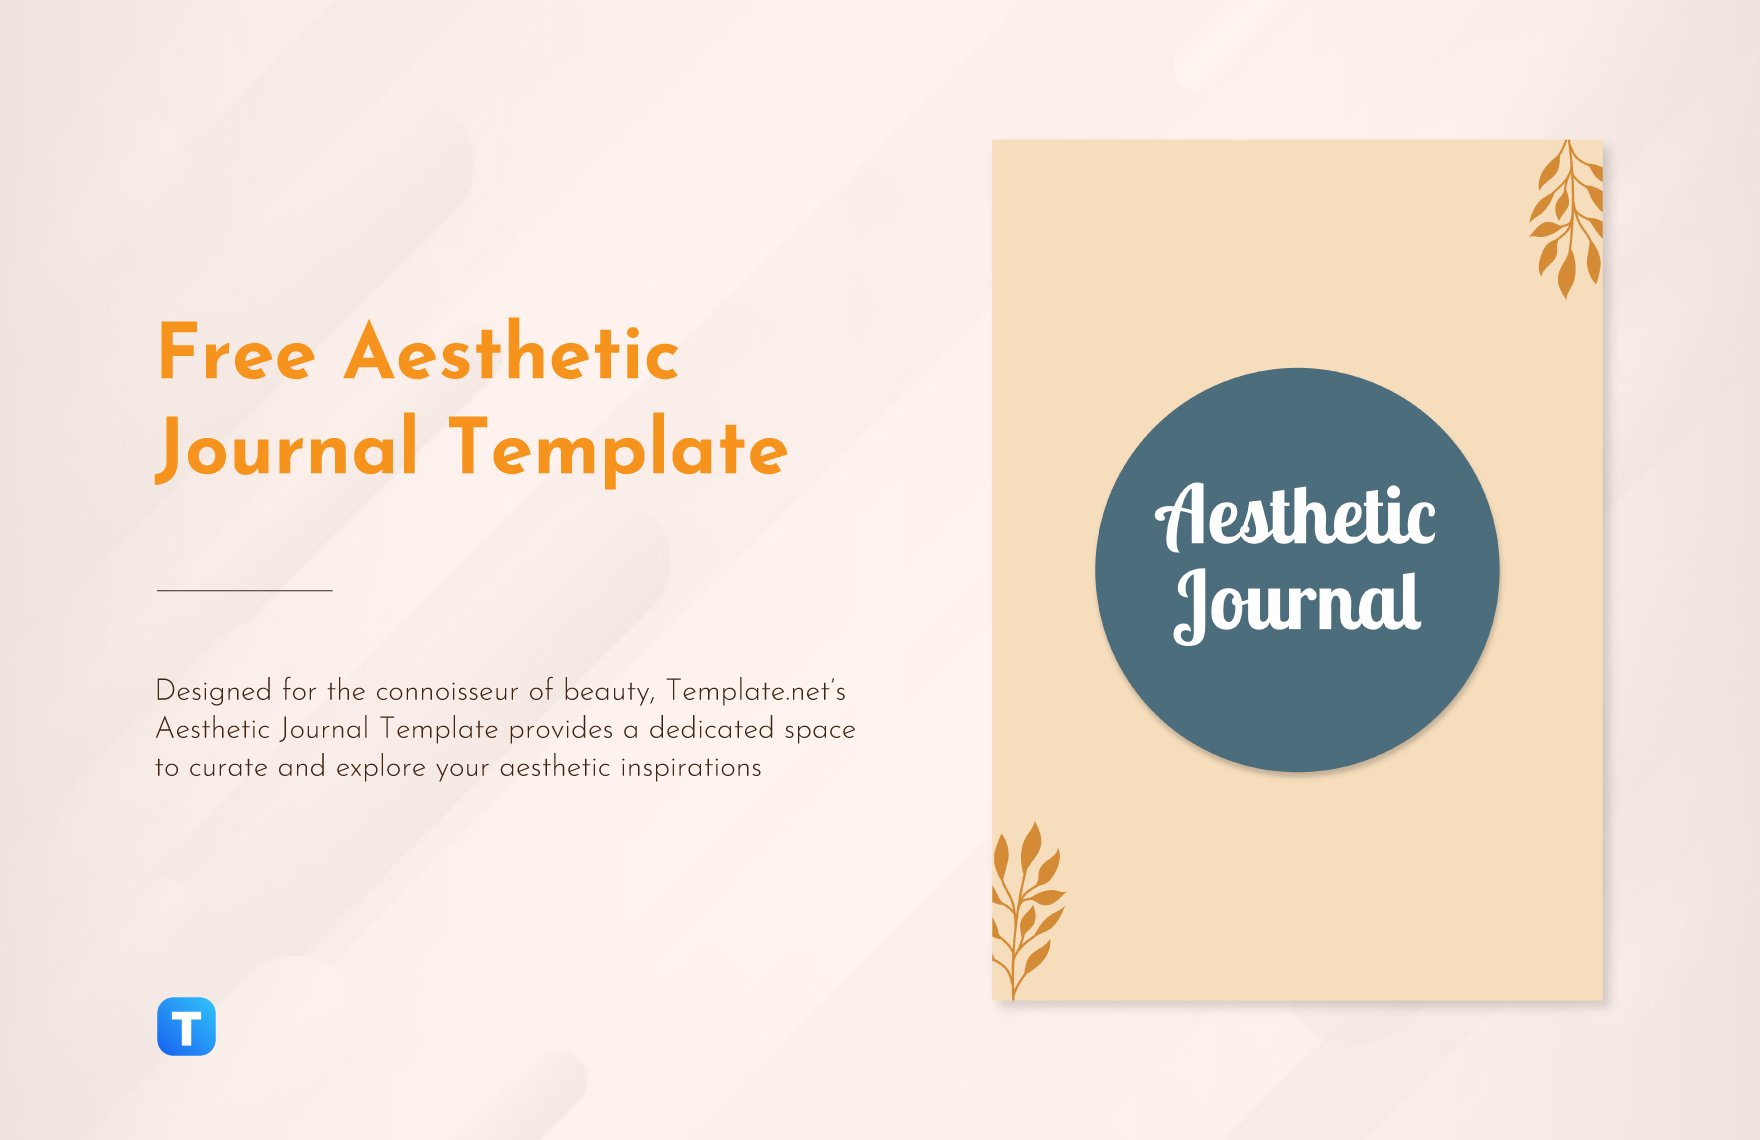 Free Aesthetic Journal Template